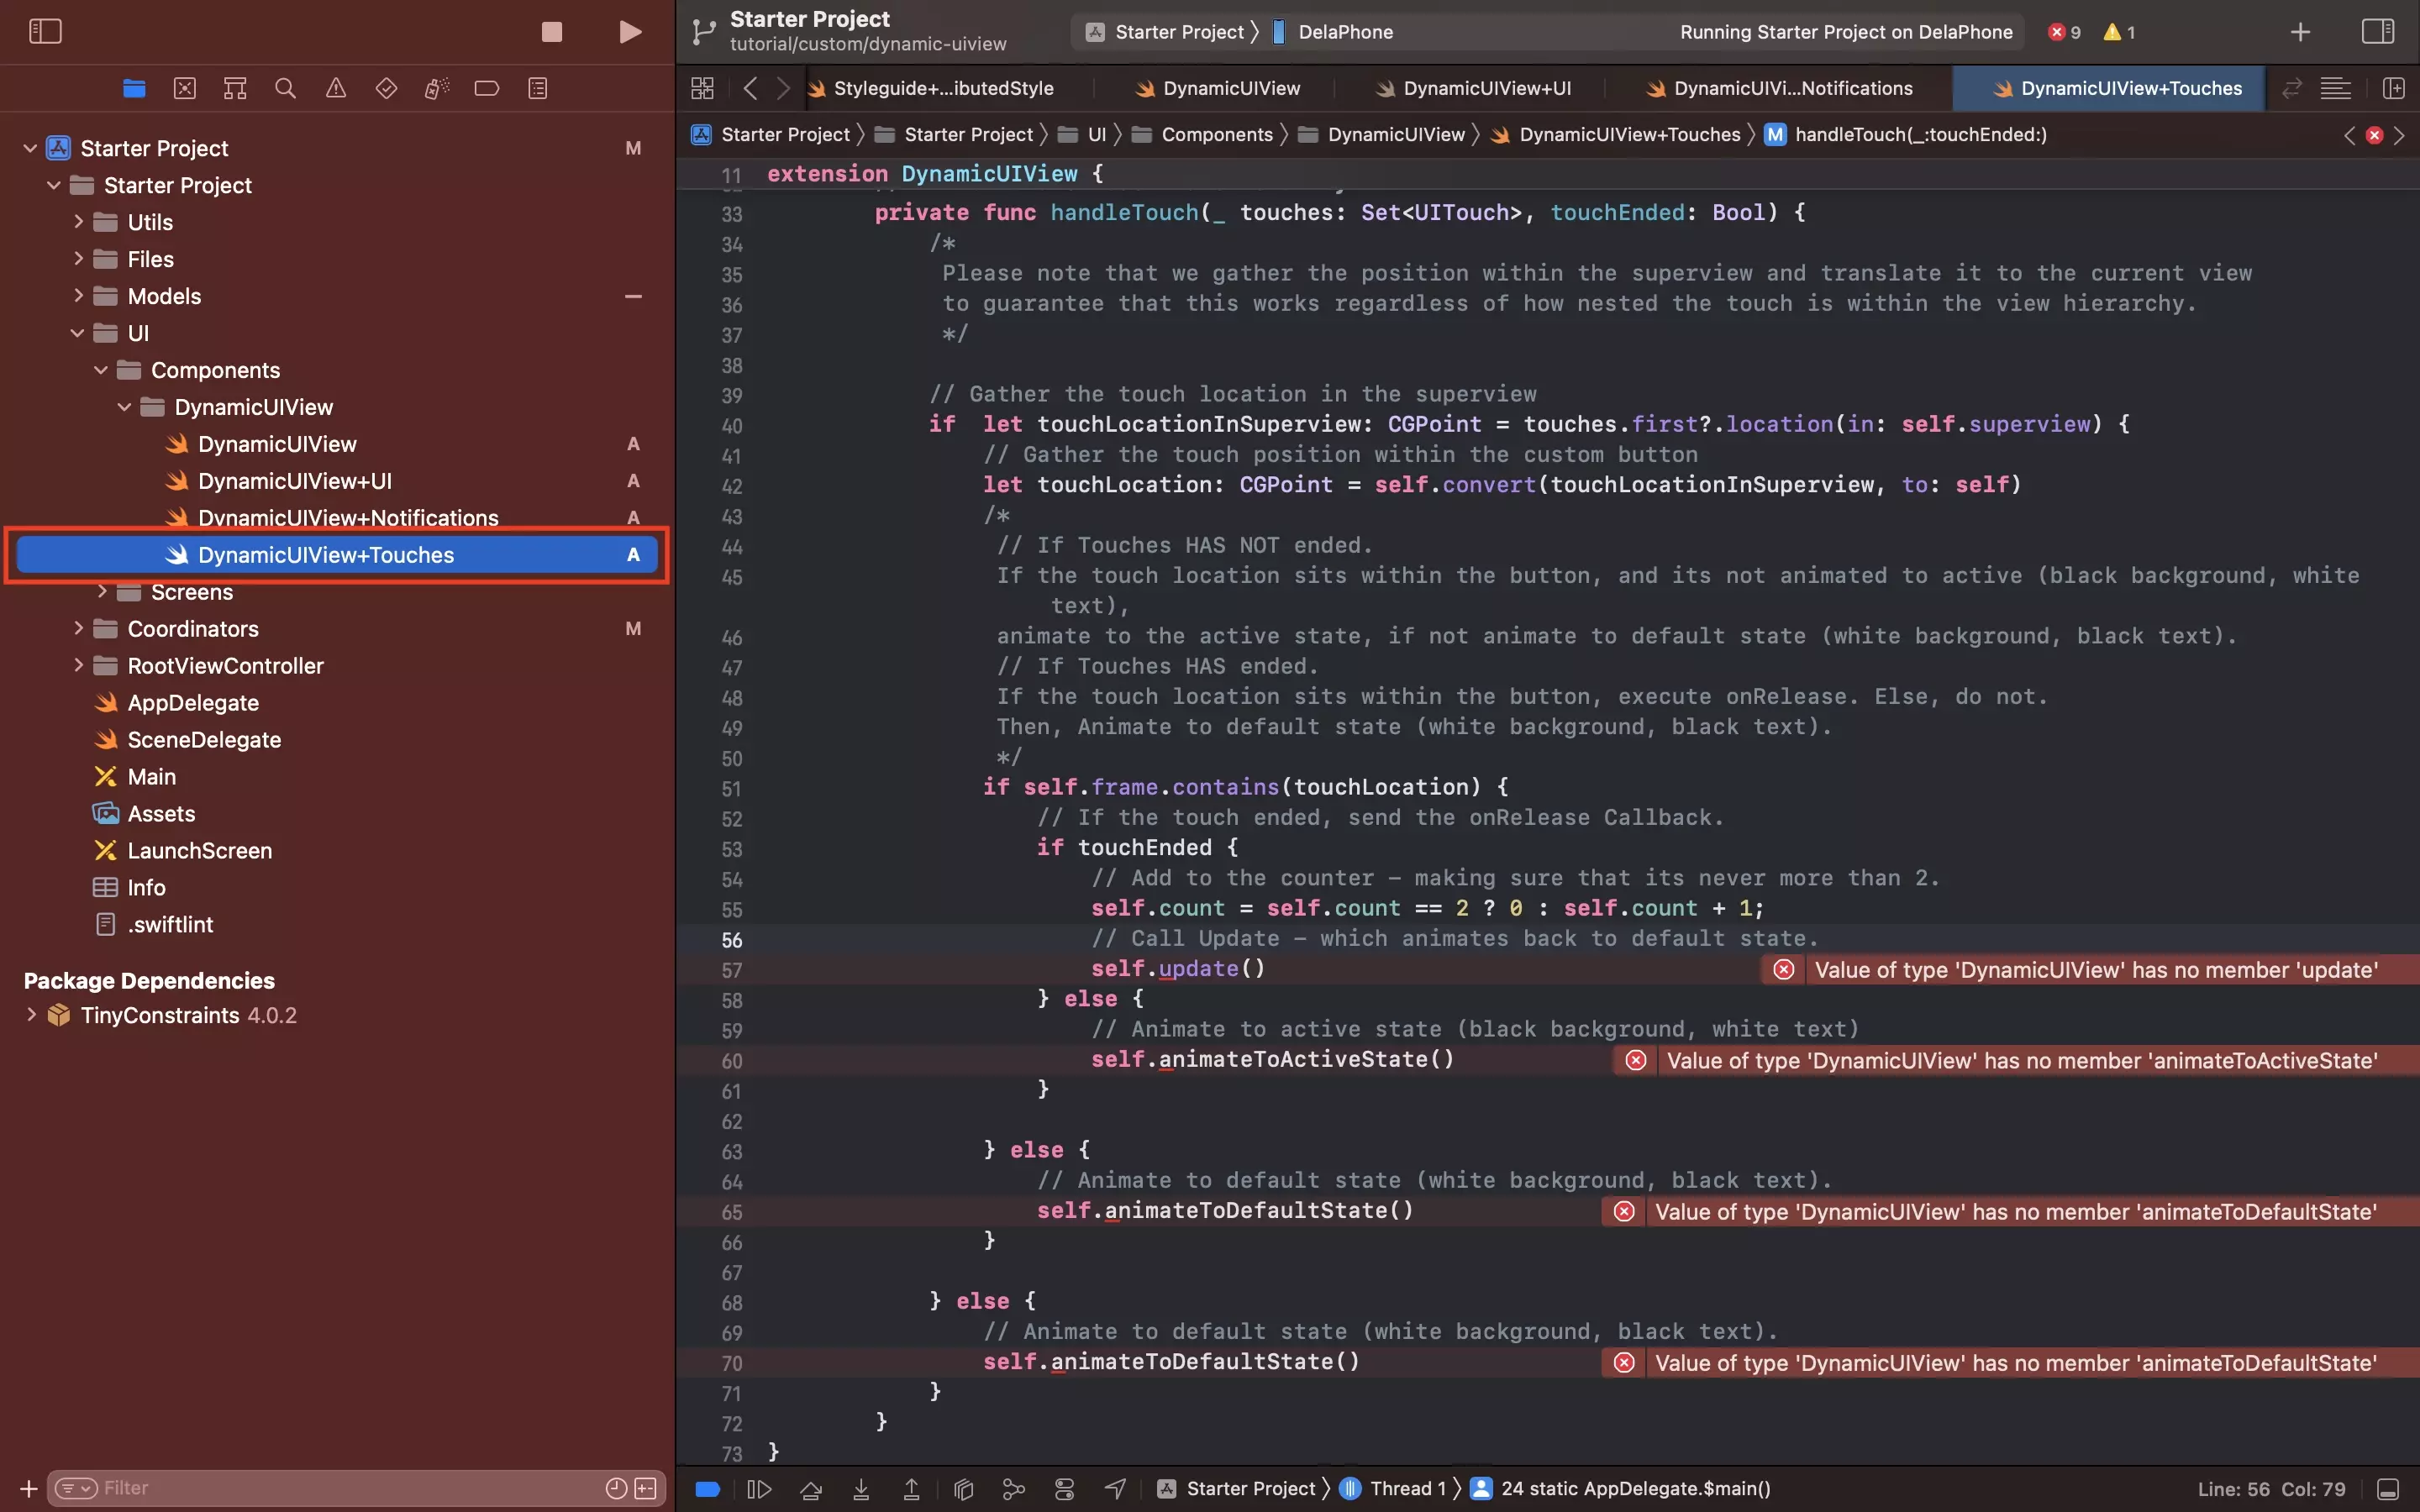 A screenshot of Xcode showing the DynamicUIView+Touches.swift file, the code is available below.